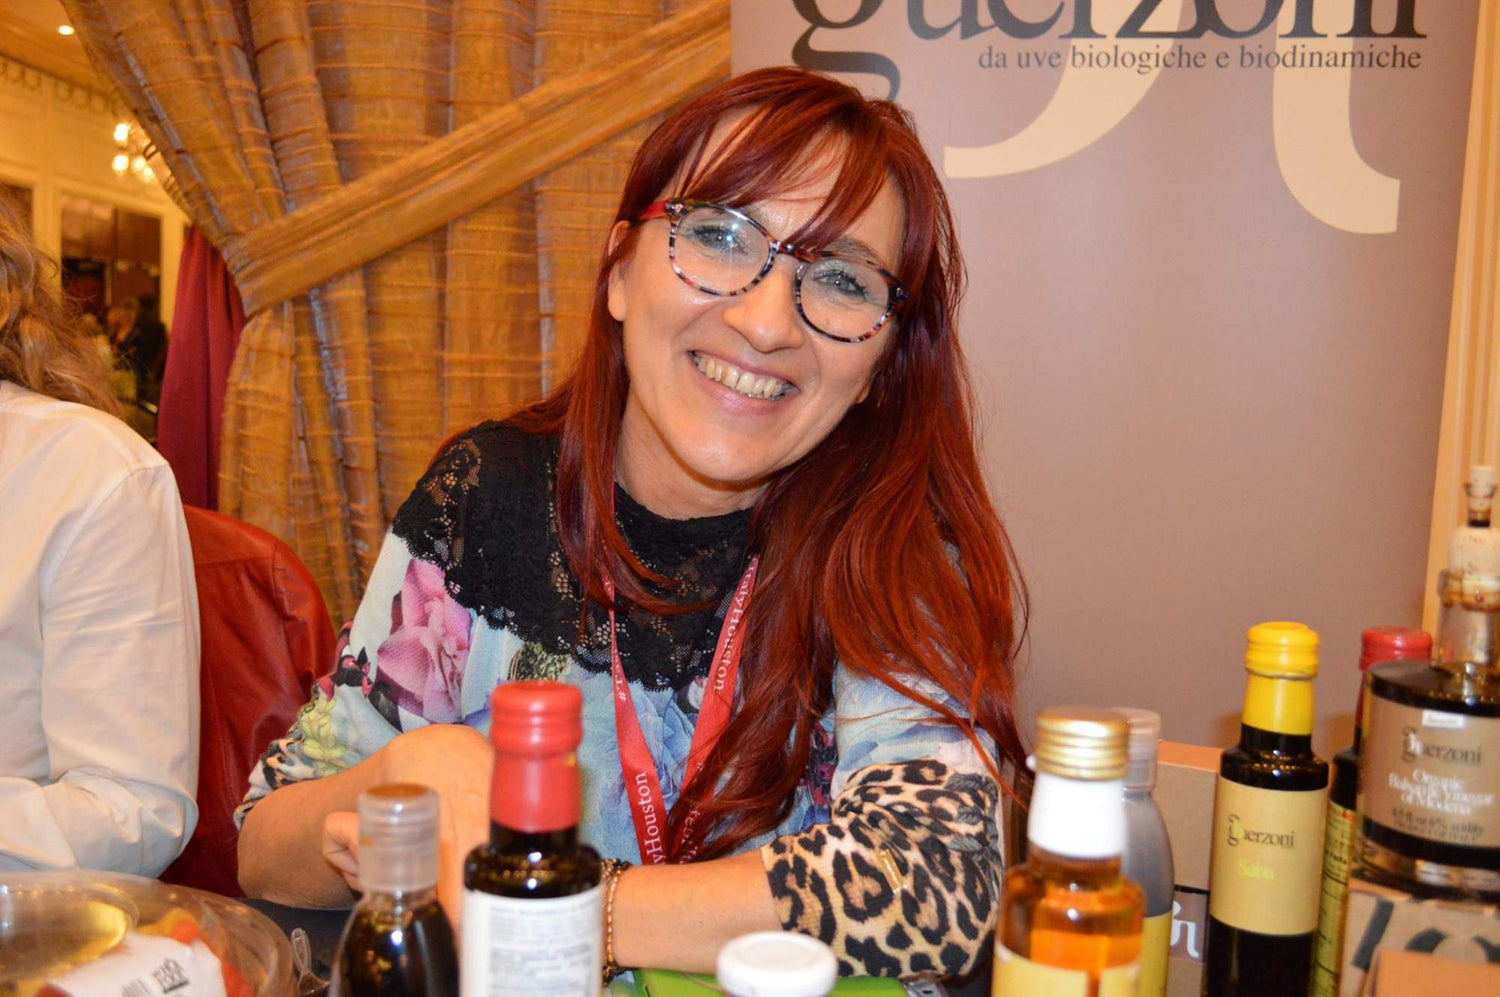 ACETAIA GUERZONI IN TEXAS AT “TASTE OF ITALY”